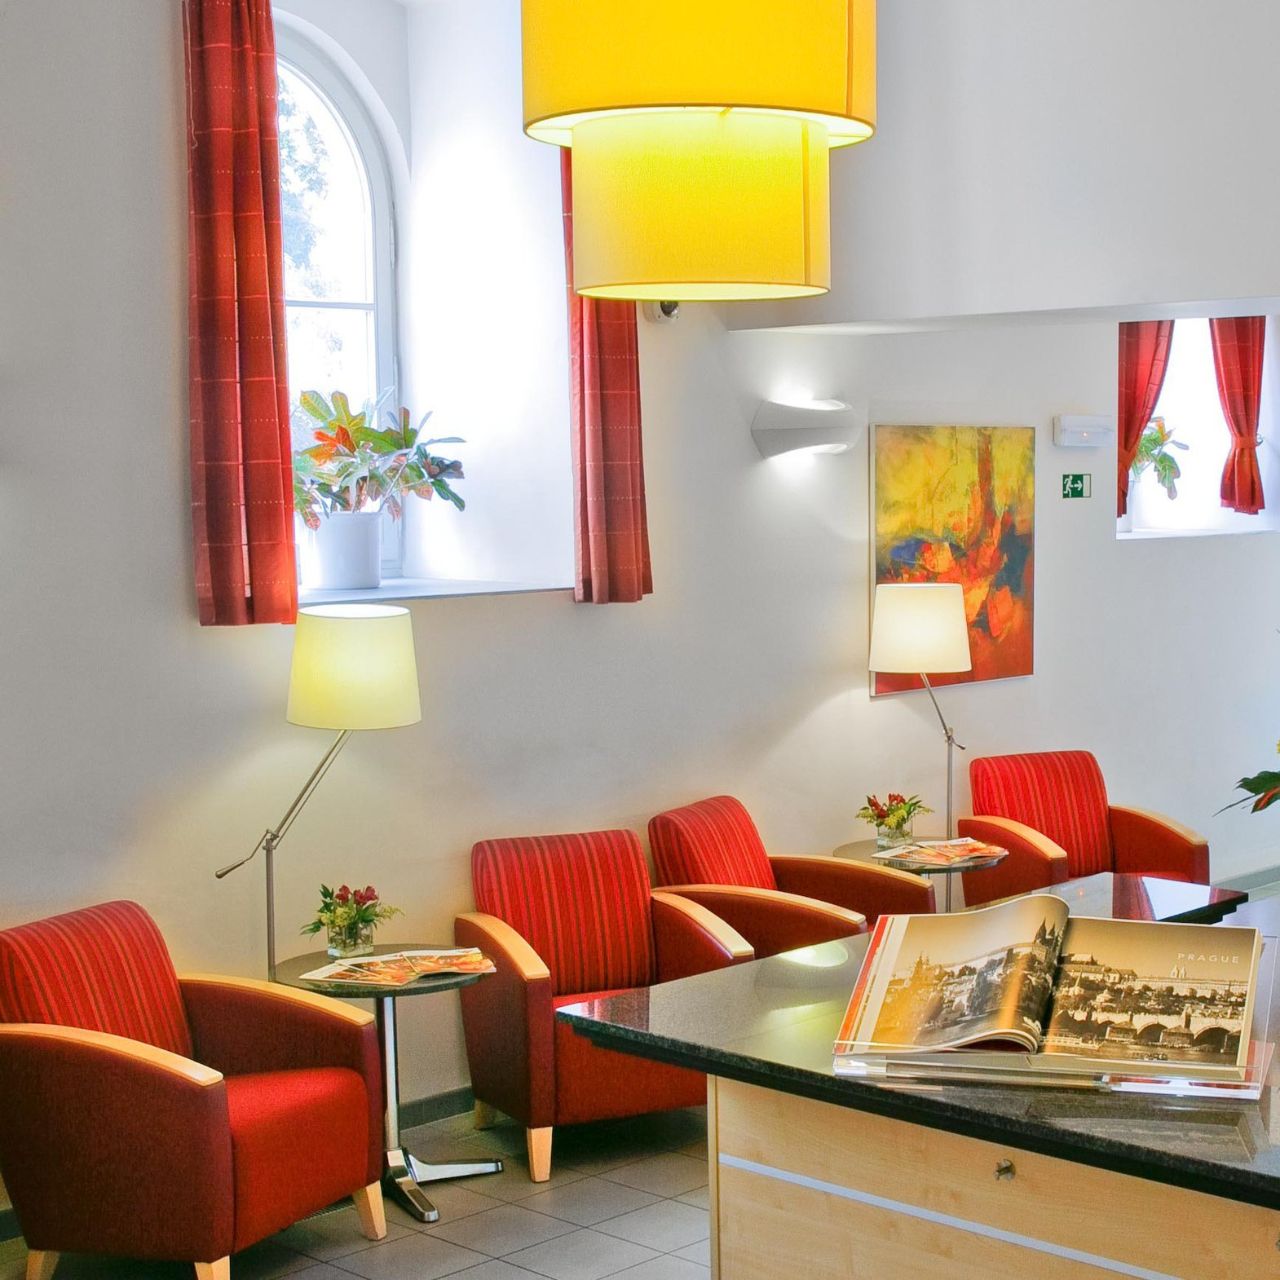 Hotel EXE CITY PARK - Prague - Great prices at HOTEL INFO